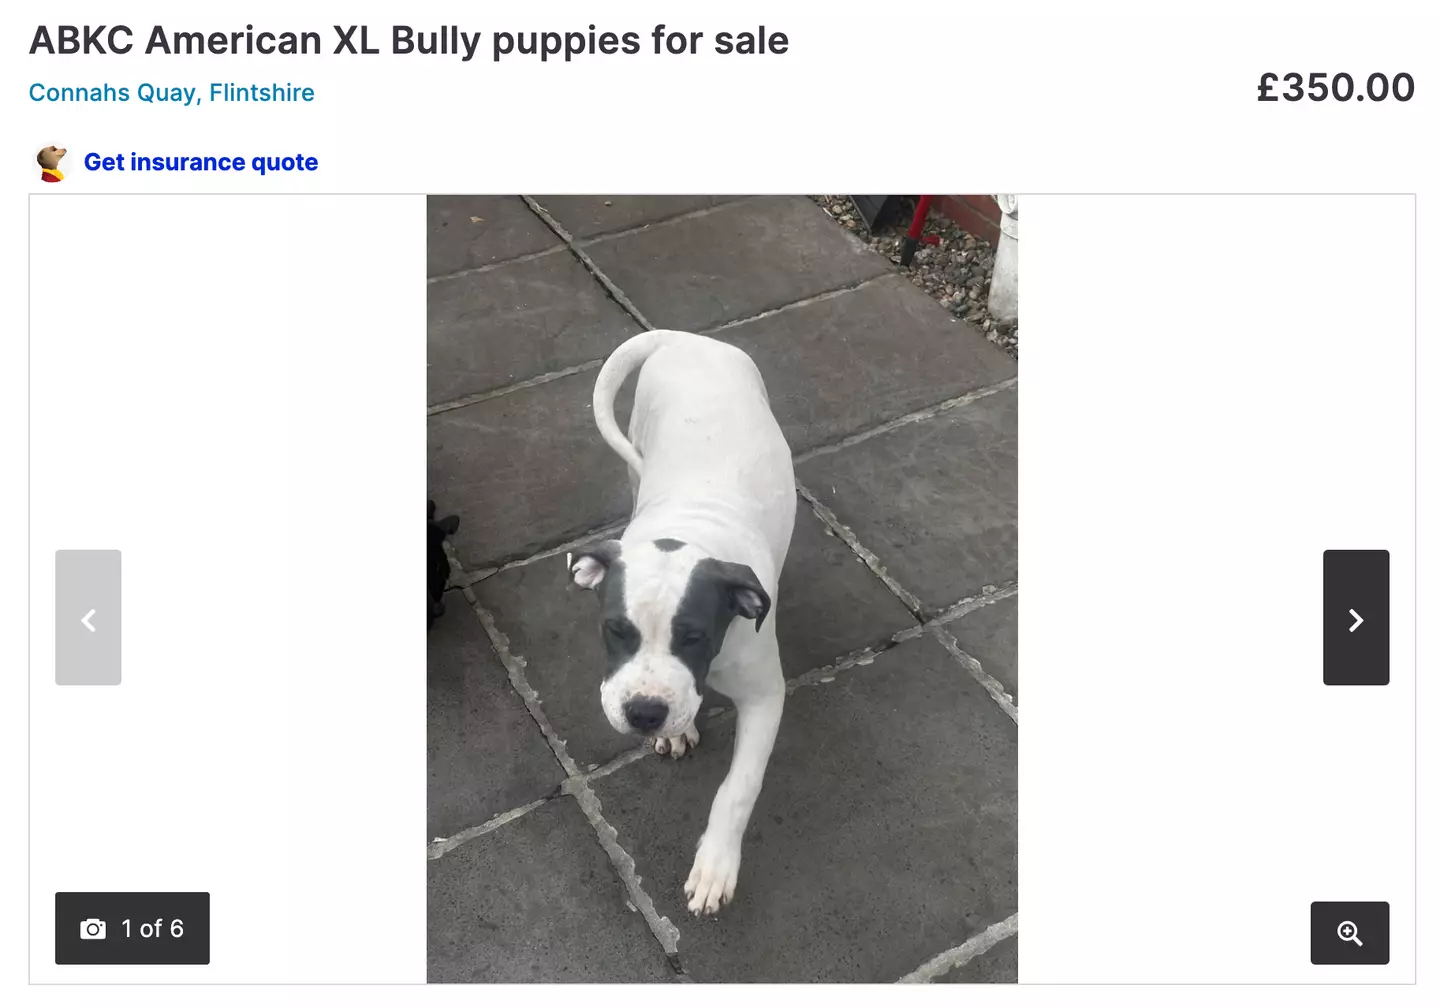 Some of the dogs are being sold for as little as £350.